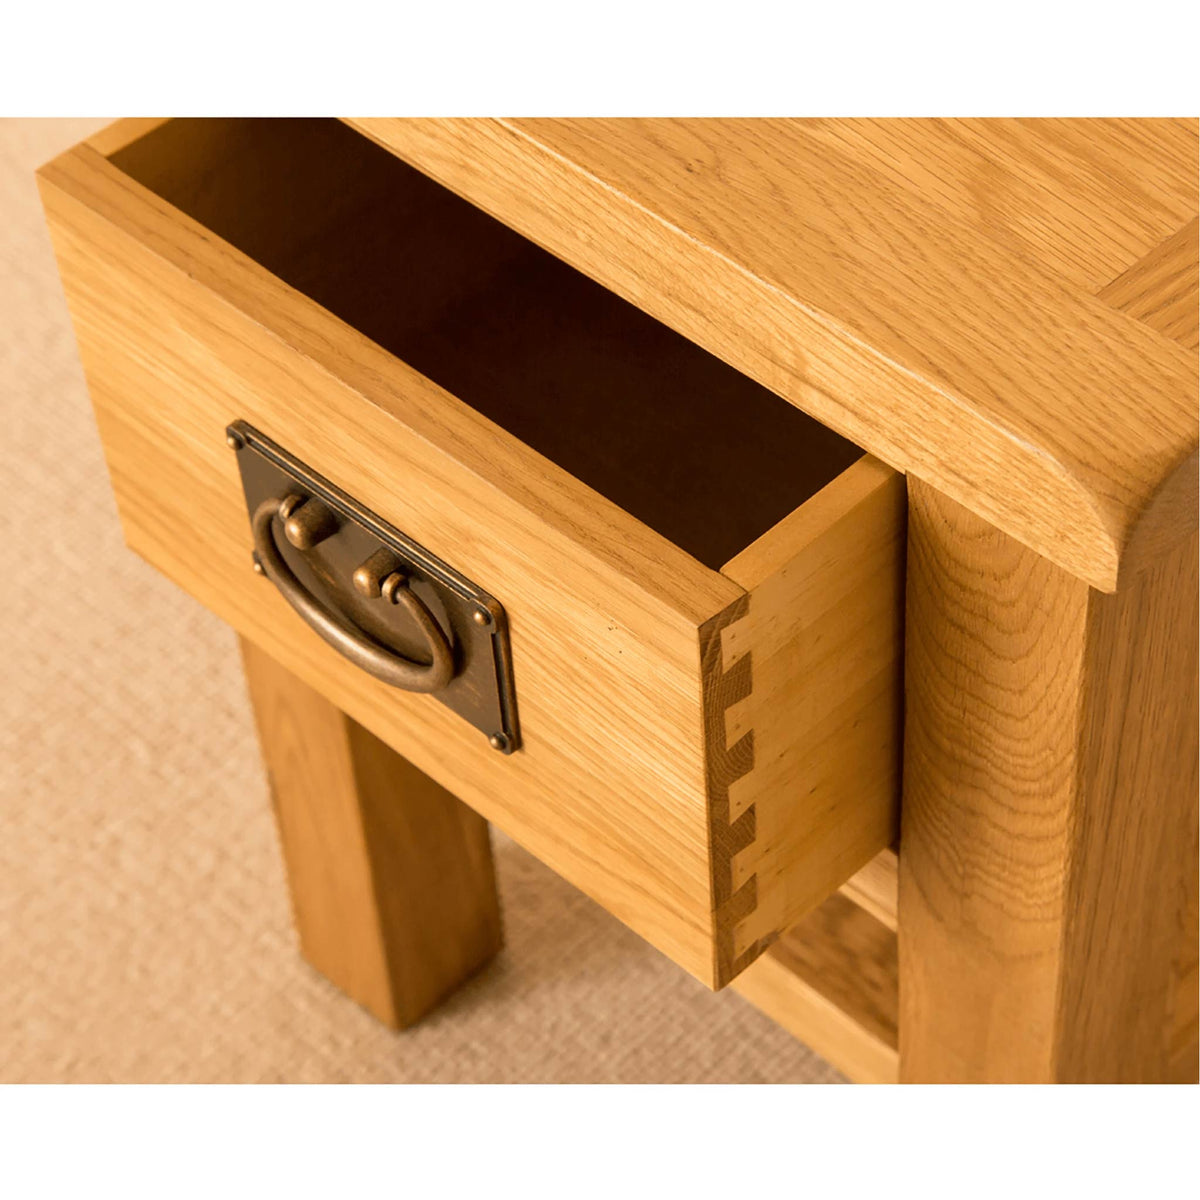 Lanner Oak Lamp Table drawer dovetail joint view